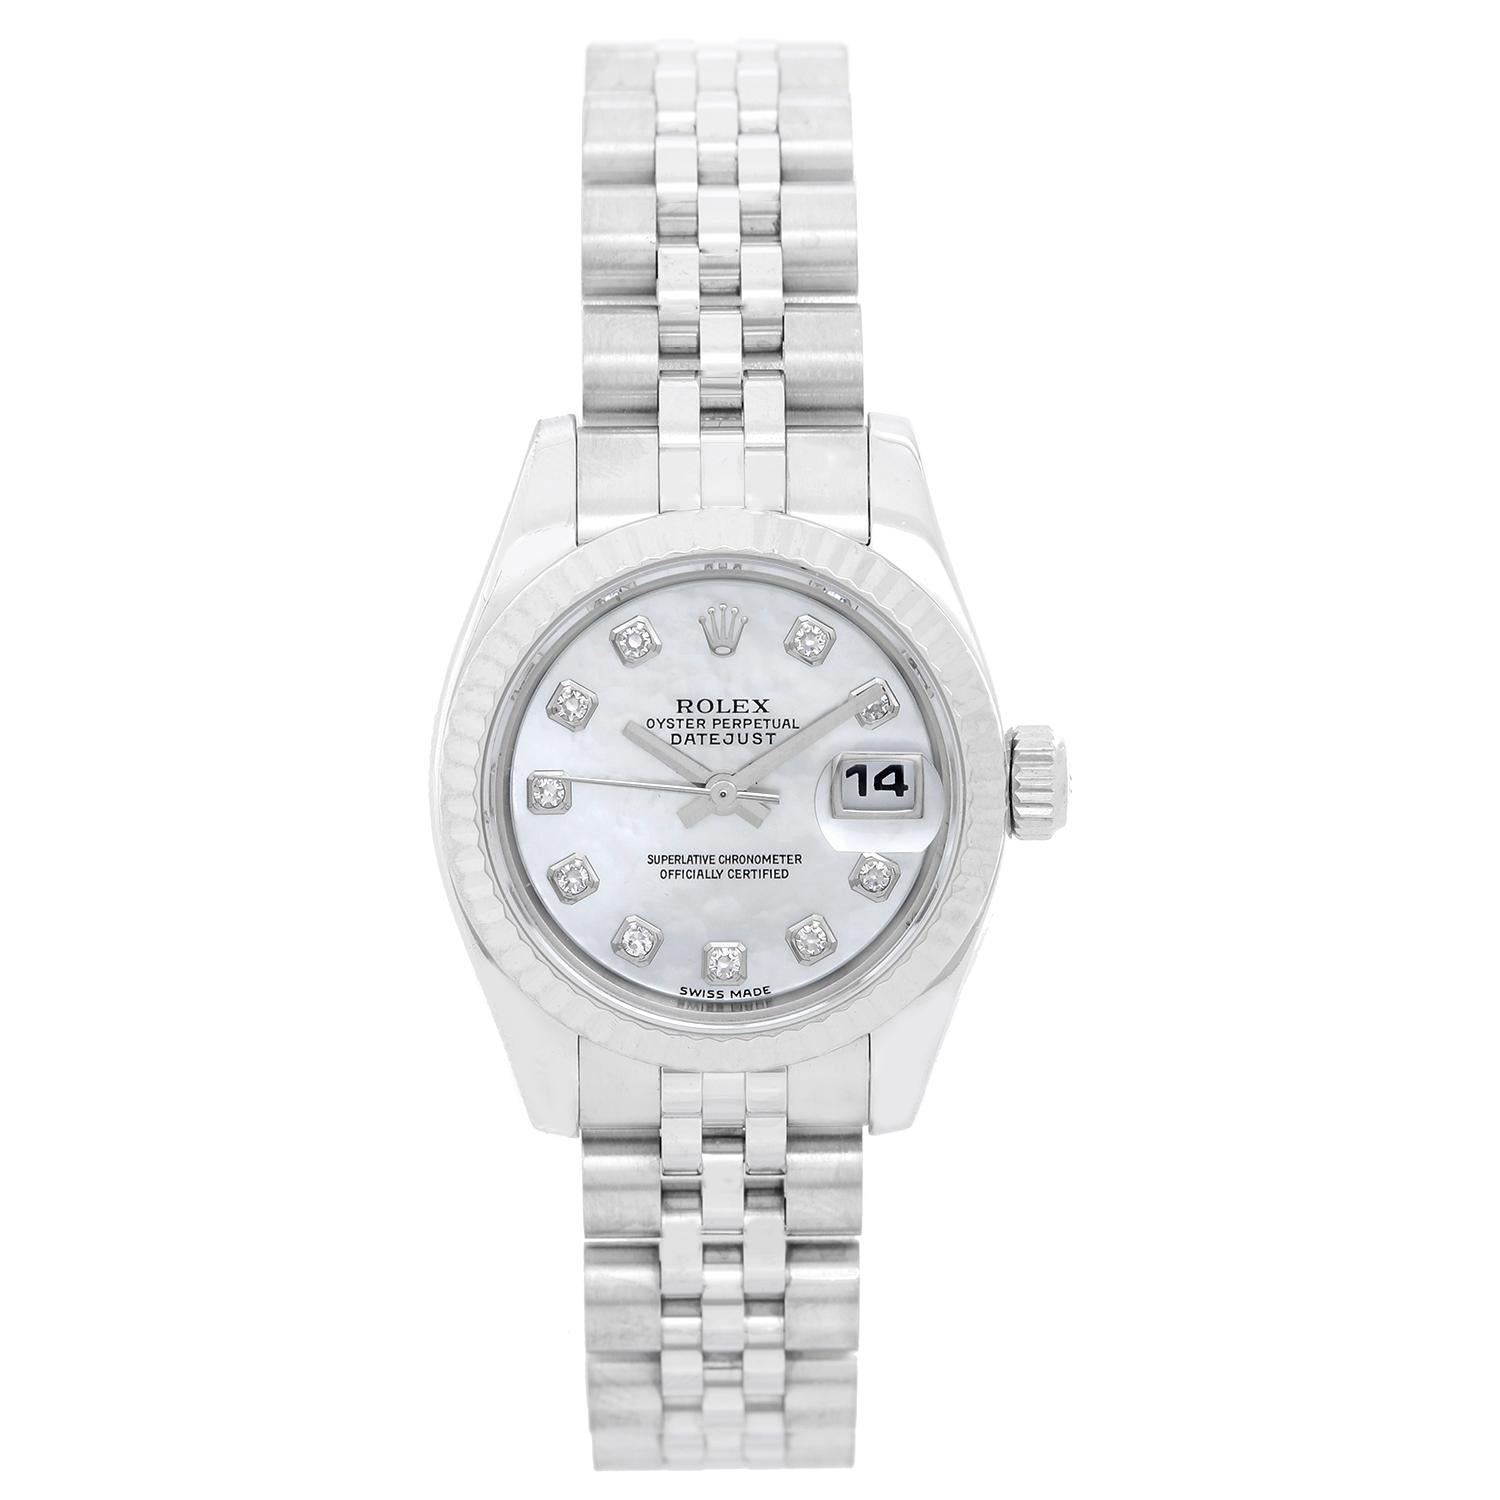 Rolex Ladies Datejust Stainless Steel Watch 179174 -  Automatic winding, 31 jewels, sapphire crystal. Stainless steel case with 18k white gold fluted bezel  (26mm diameter). Rolex white mother of pearl dial with diamond hour markers. Stainless steel